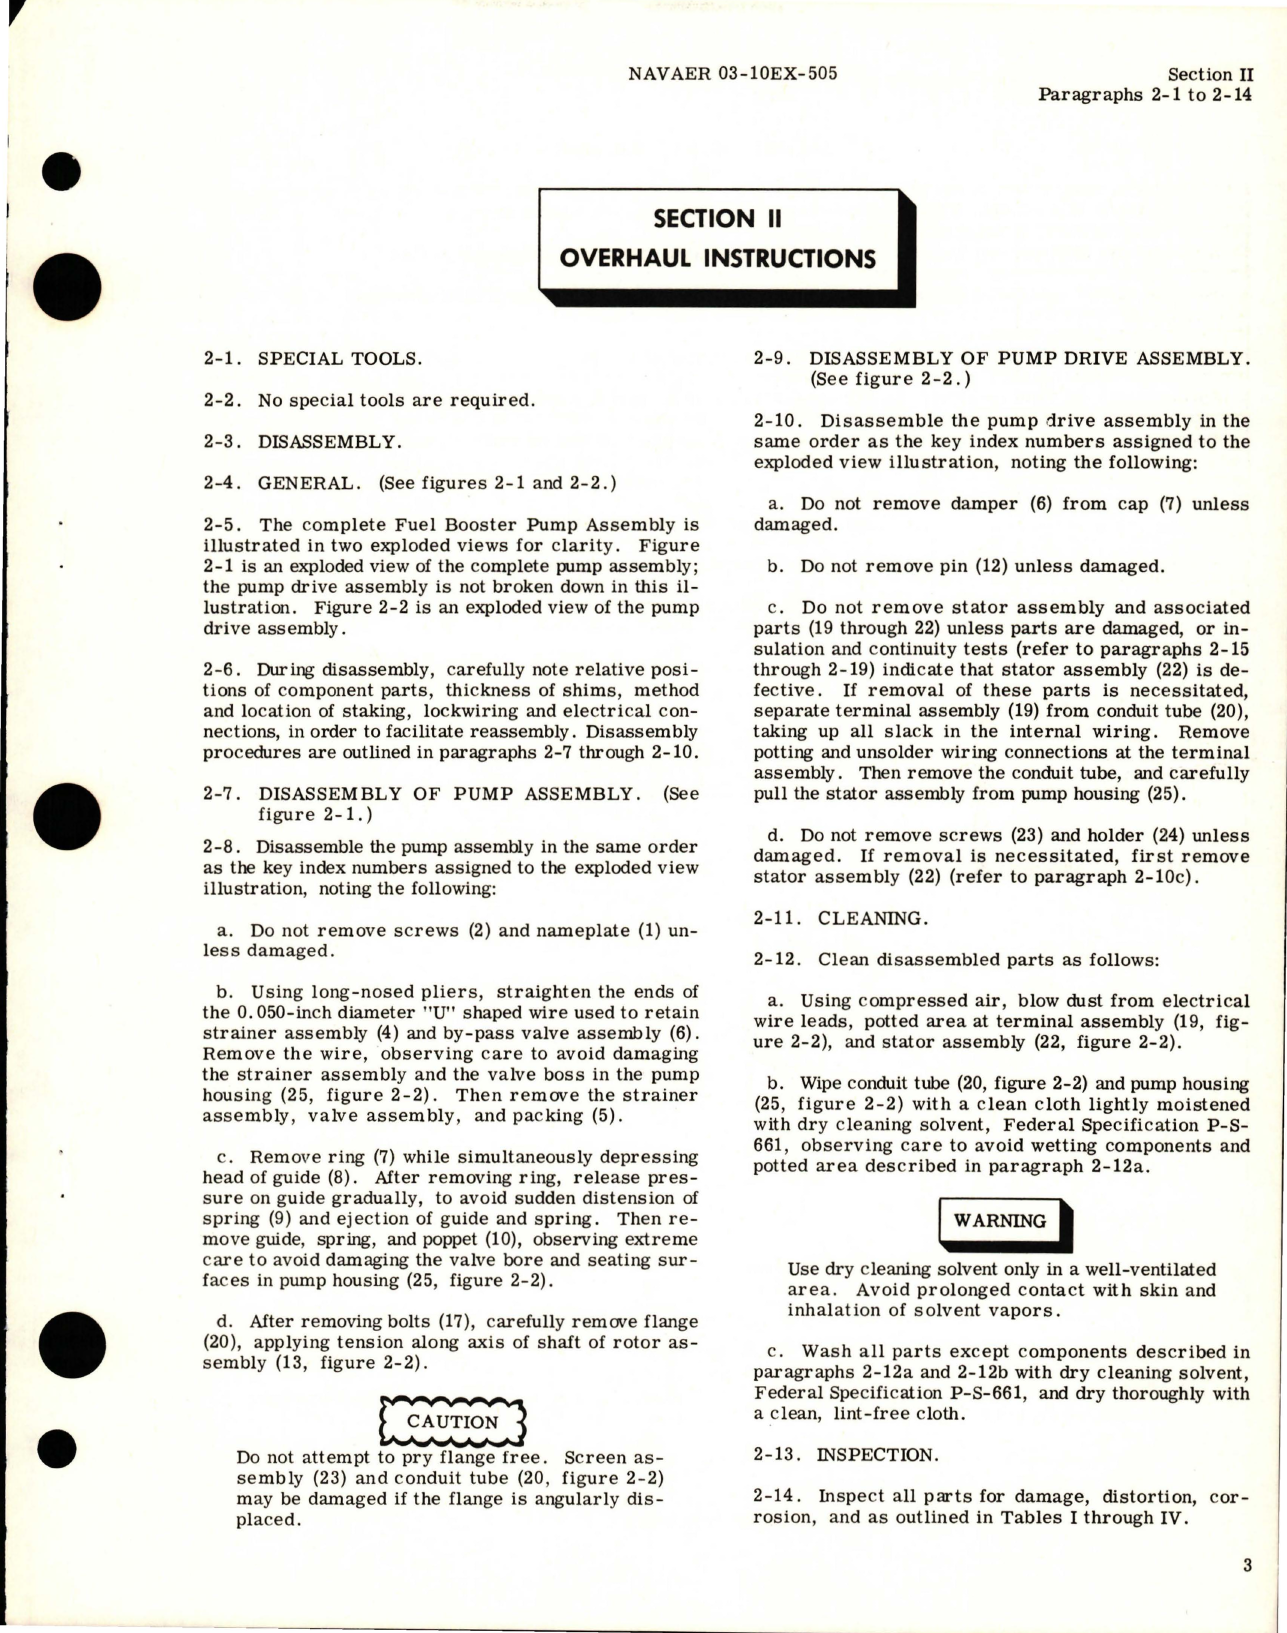 Sample page 5 from AirCorps Library document: Overhaul Instructions for Fuel Booster Pump - Part 60-151